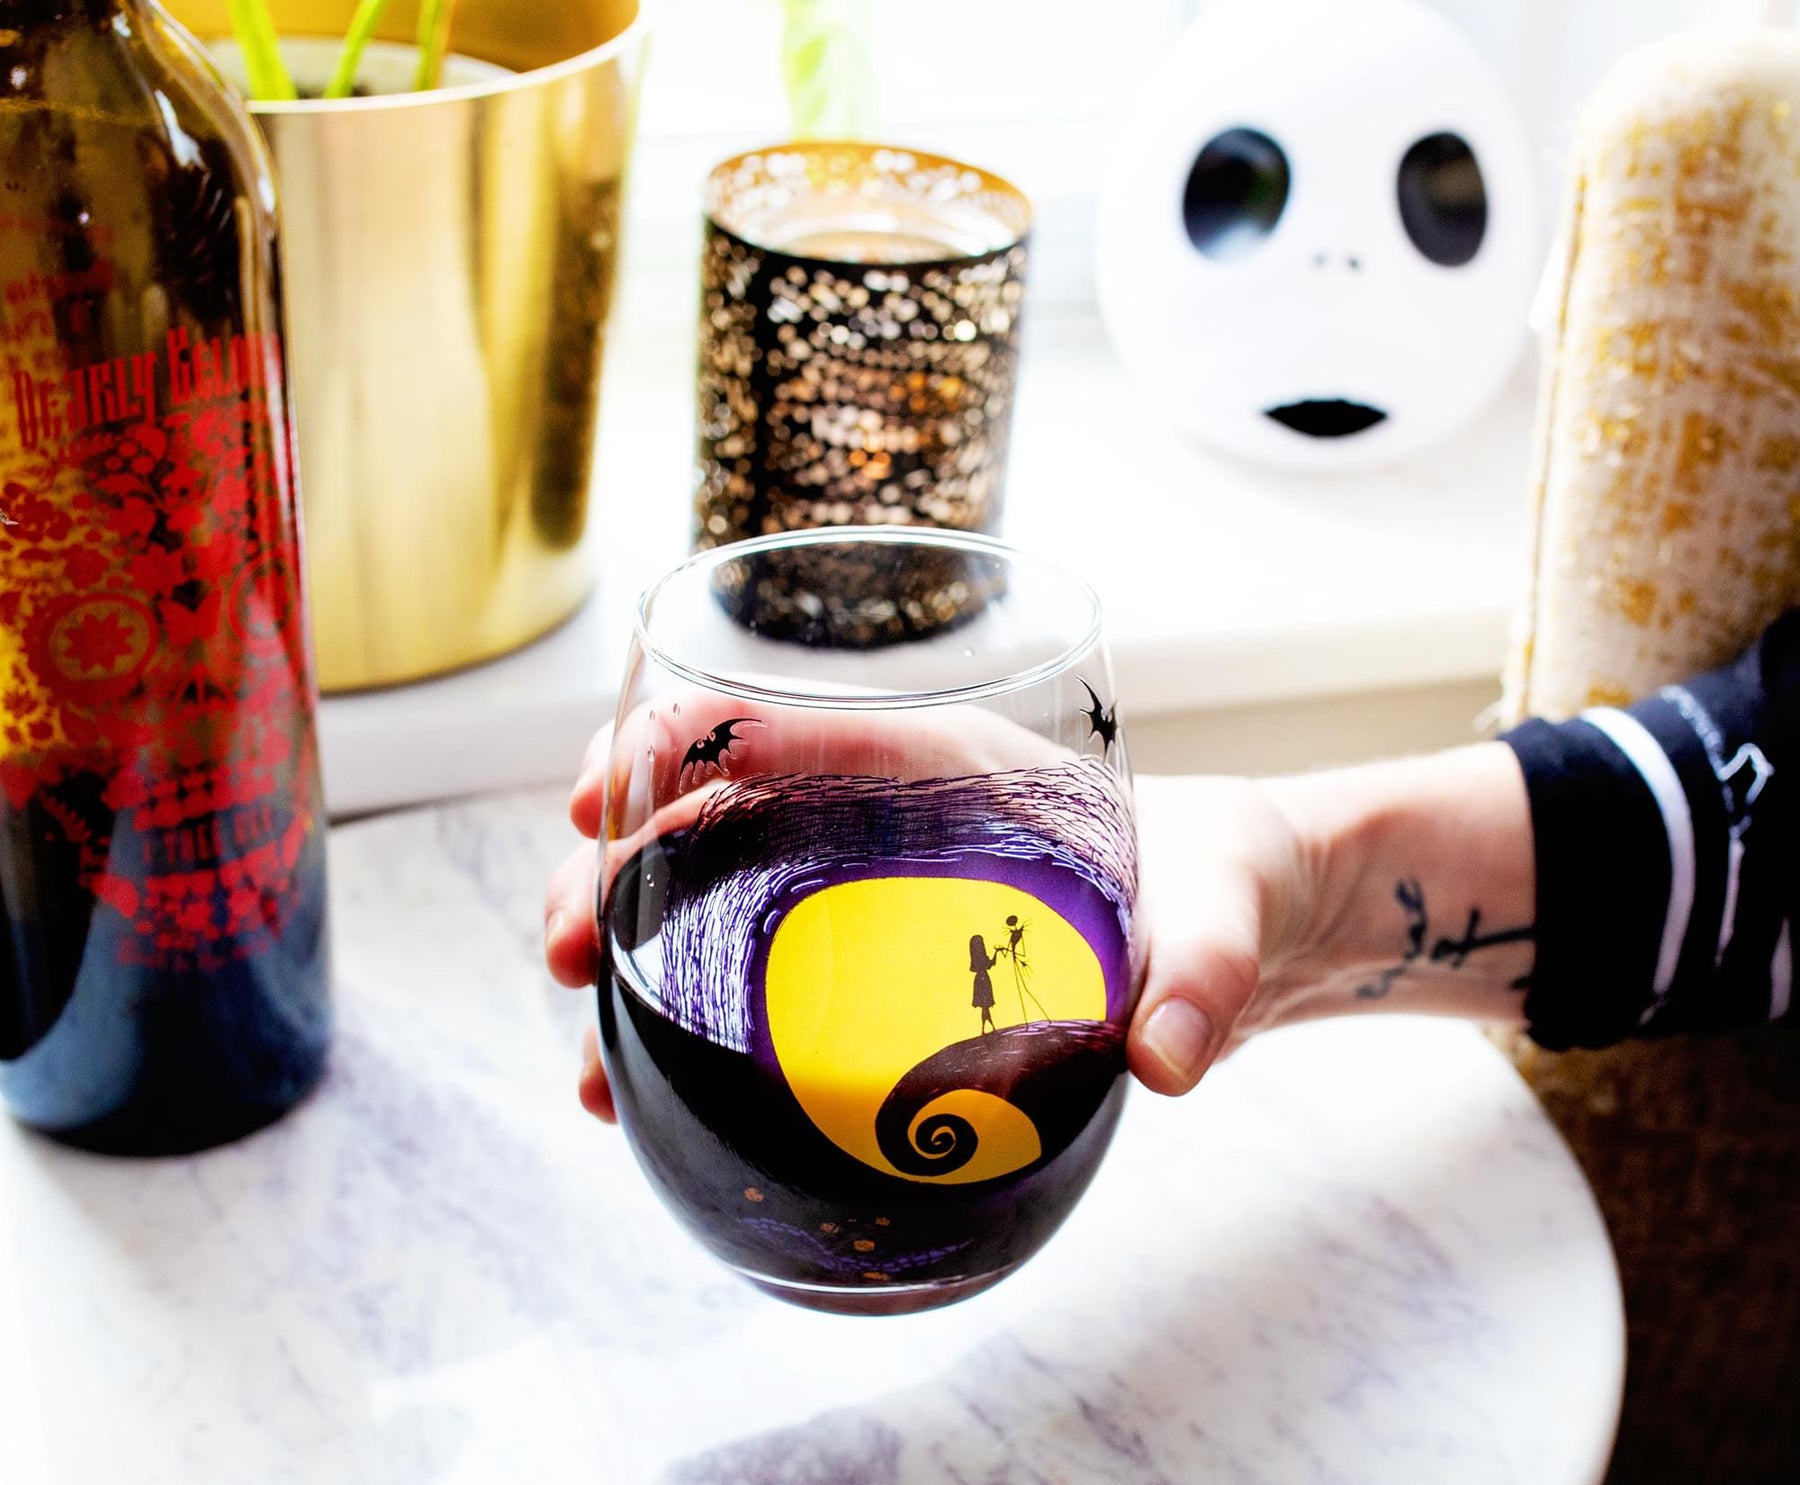 Disney The Nightmare Before Christmas Jack & Sally on Spiral Hill Stemless Glass